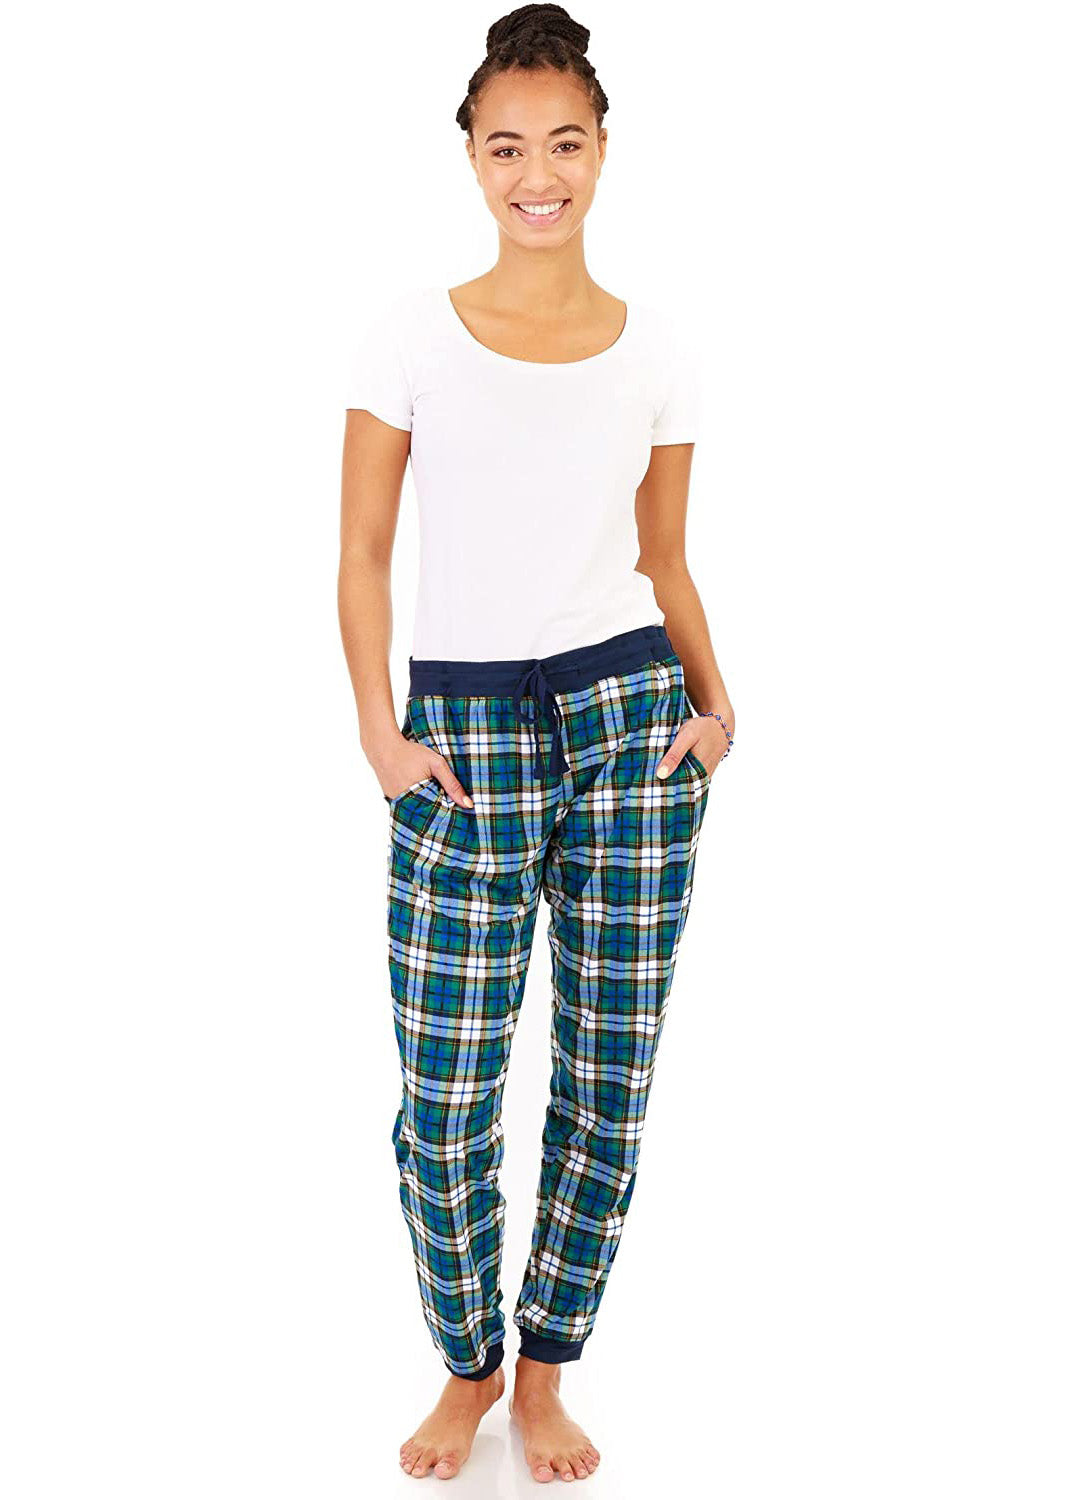 
                  
                    PJ joggers with soft velvety texture, stretch, elastic waistband, drawstring, and stylish ankle cuff. This pattern is a blue, green and gold tartan.\
                  
                